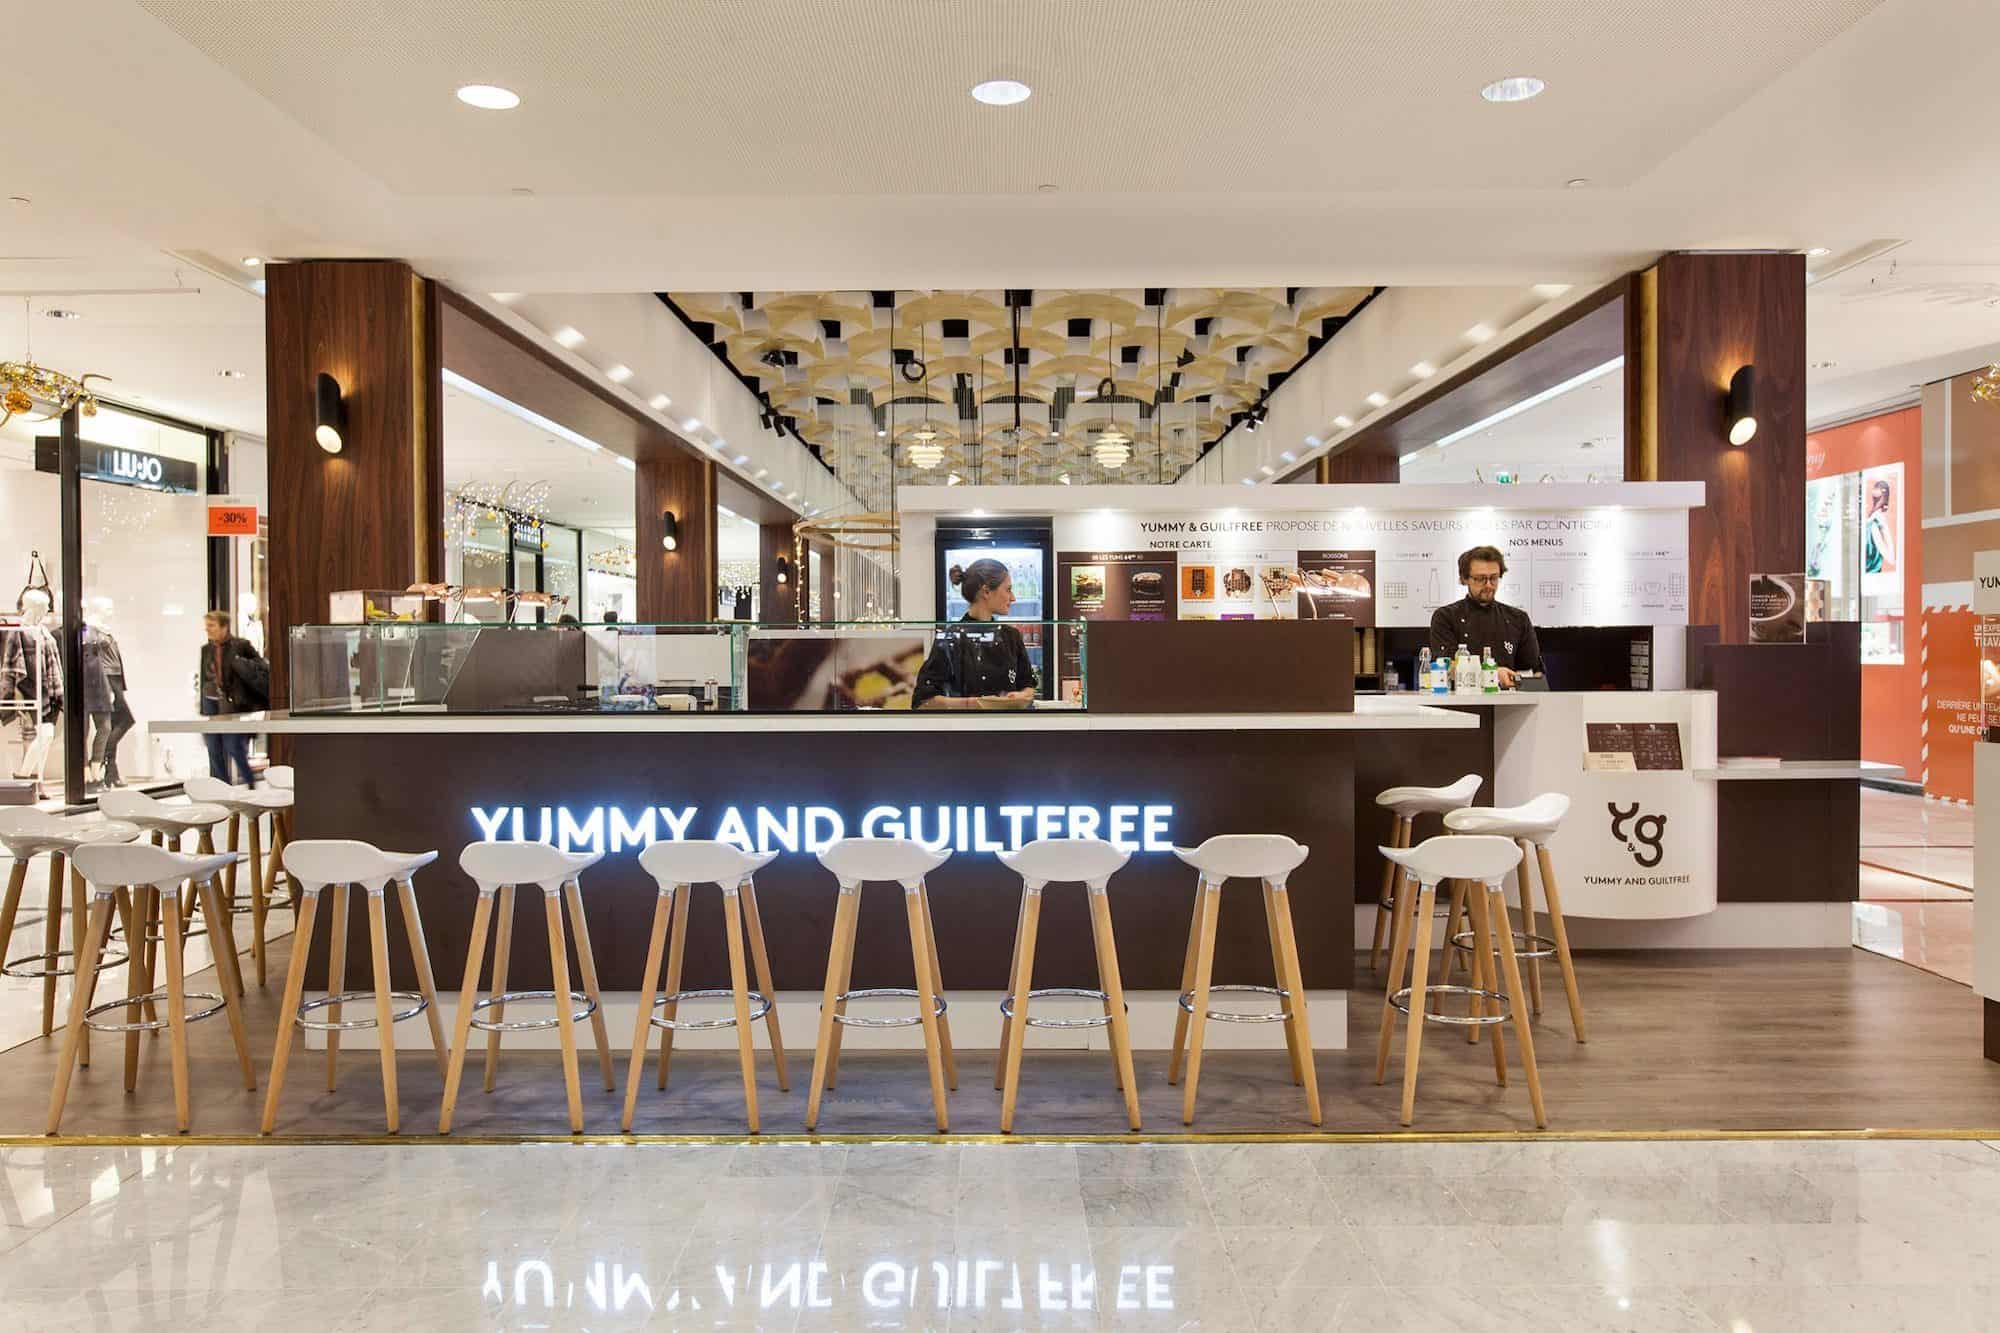 Yummy and Guiltfree, a gluten-free waffle shop in Paris, has a designer counter with a neon sign.